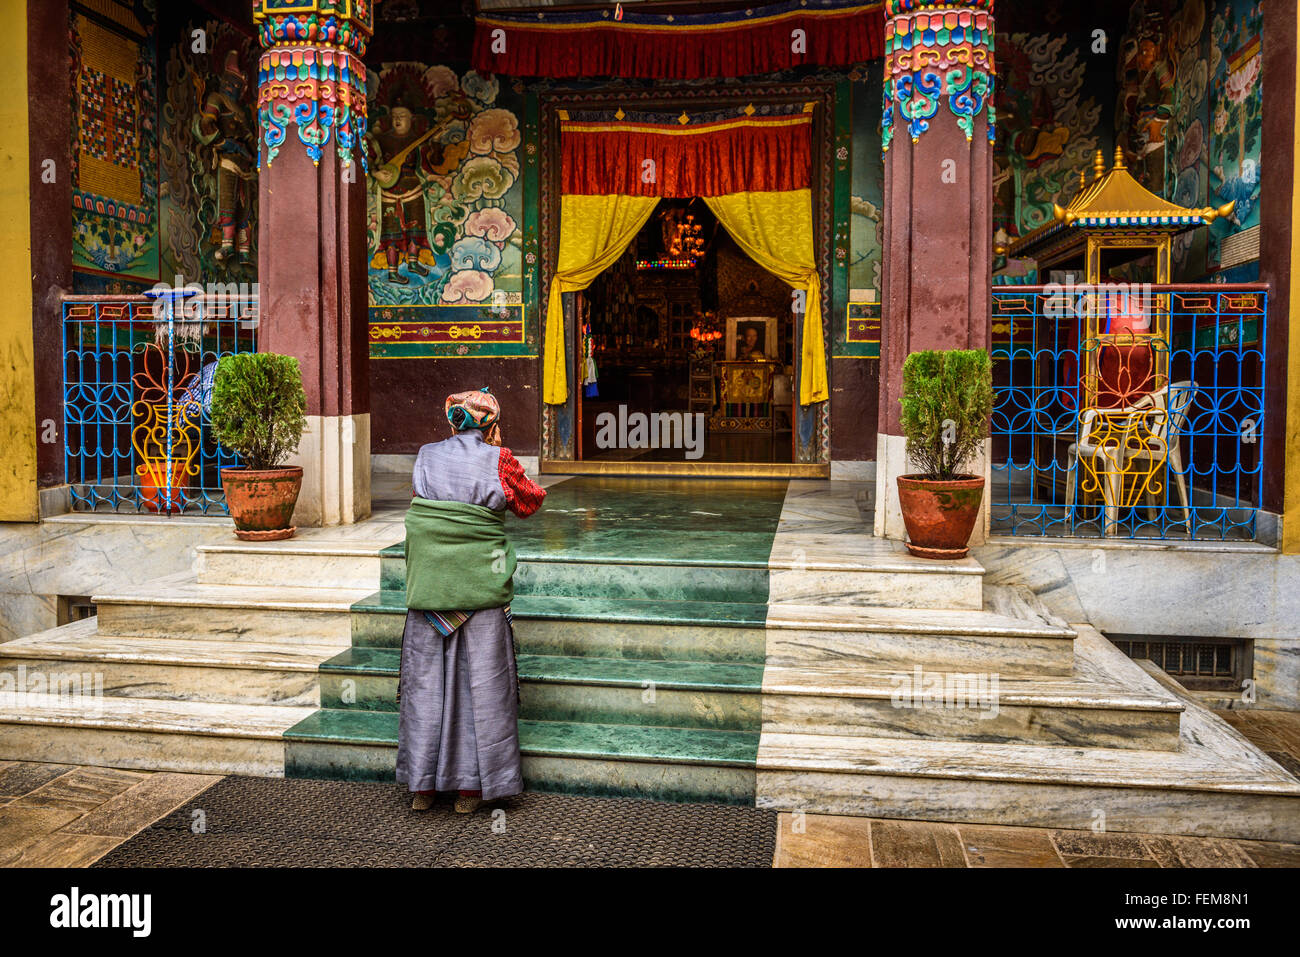 Old woman wearing traditional costume prays in front of a buddhist temple in Kathmandu, Nepal Stock Photo